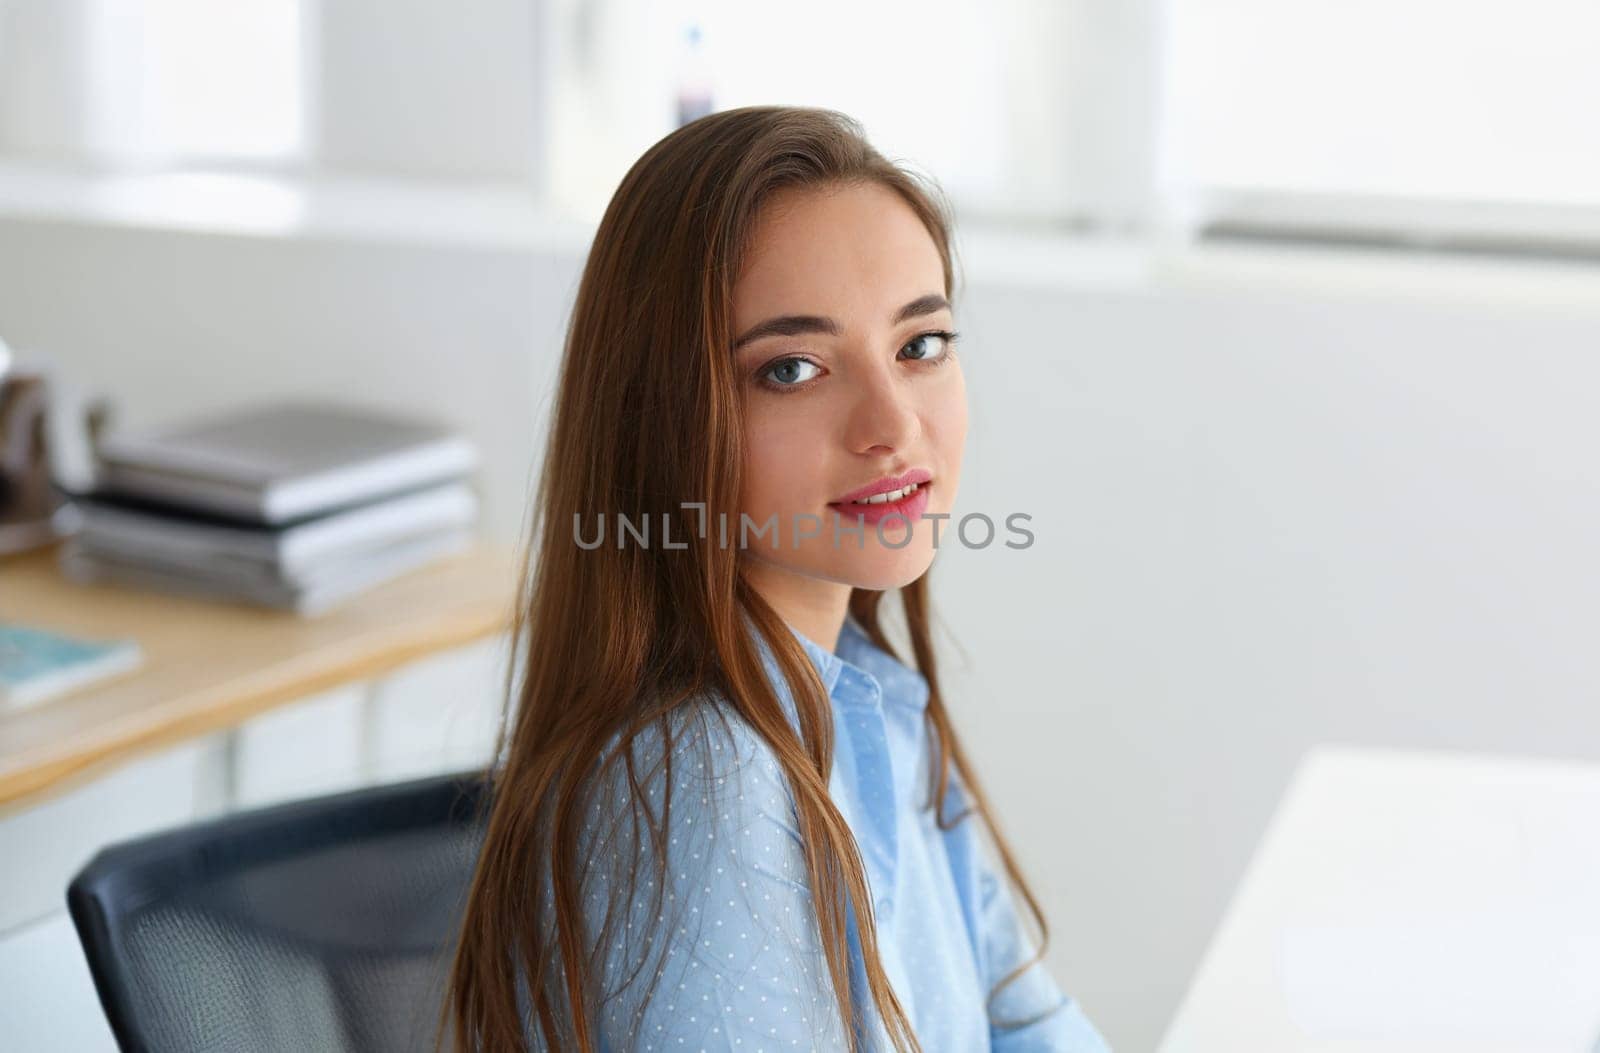 woman portrait on gray backgroung in blue shirt